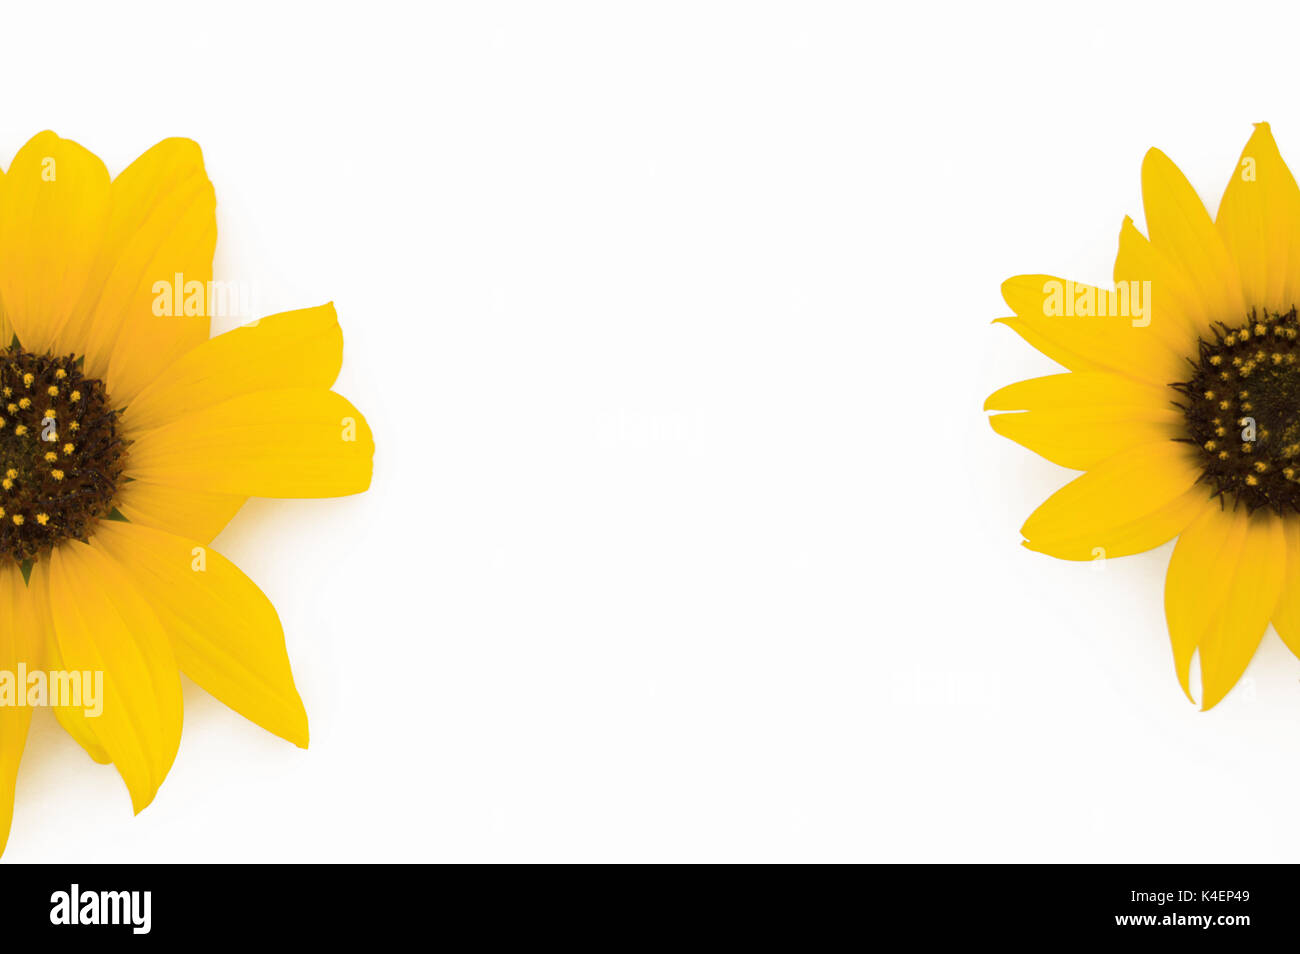 Two sunflowers on each side of a white background. Stock Photo